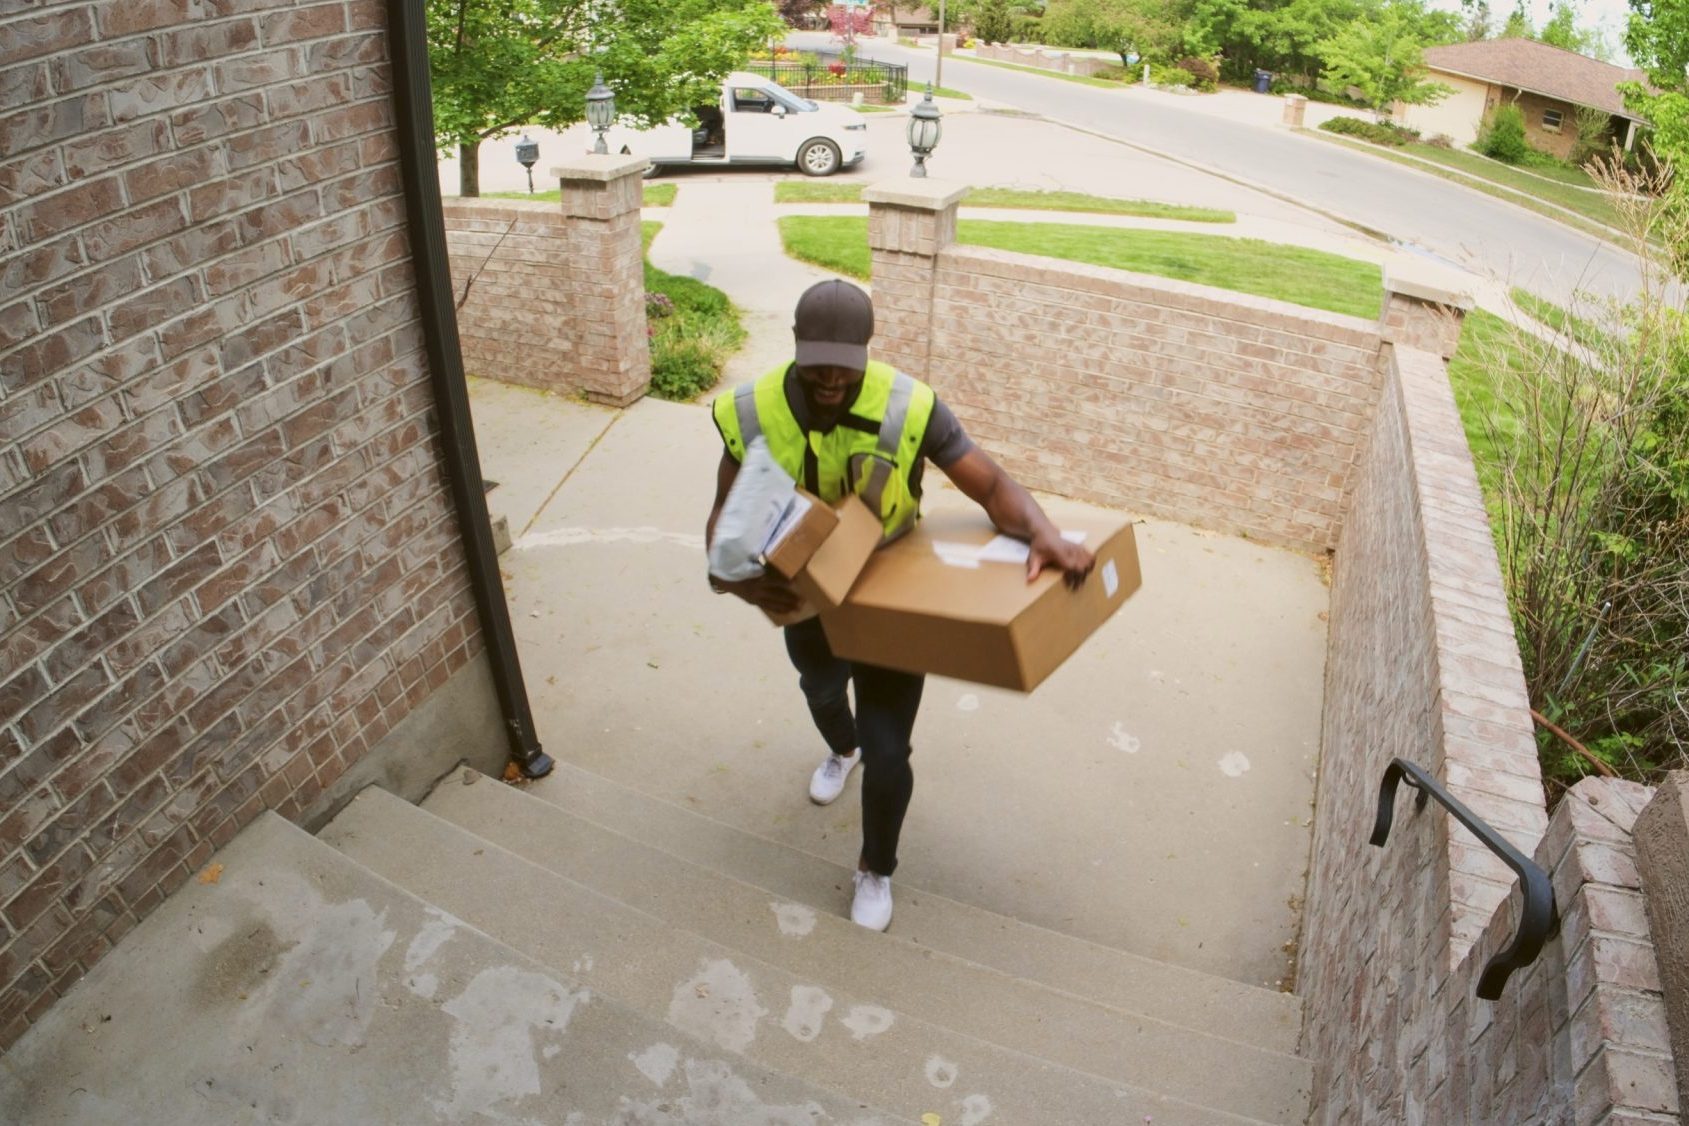 Home Security Camera Footage of Package Delivery